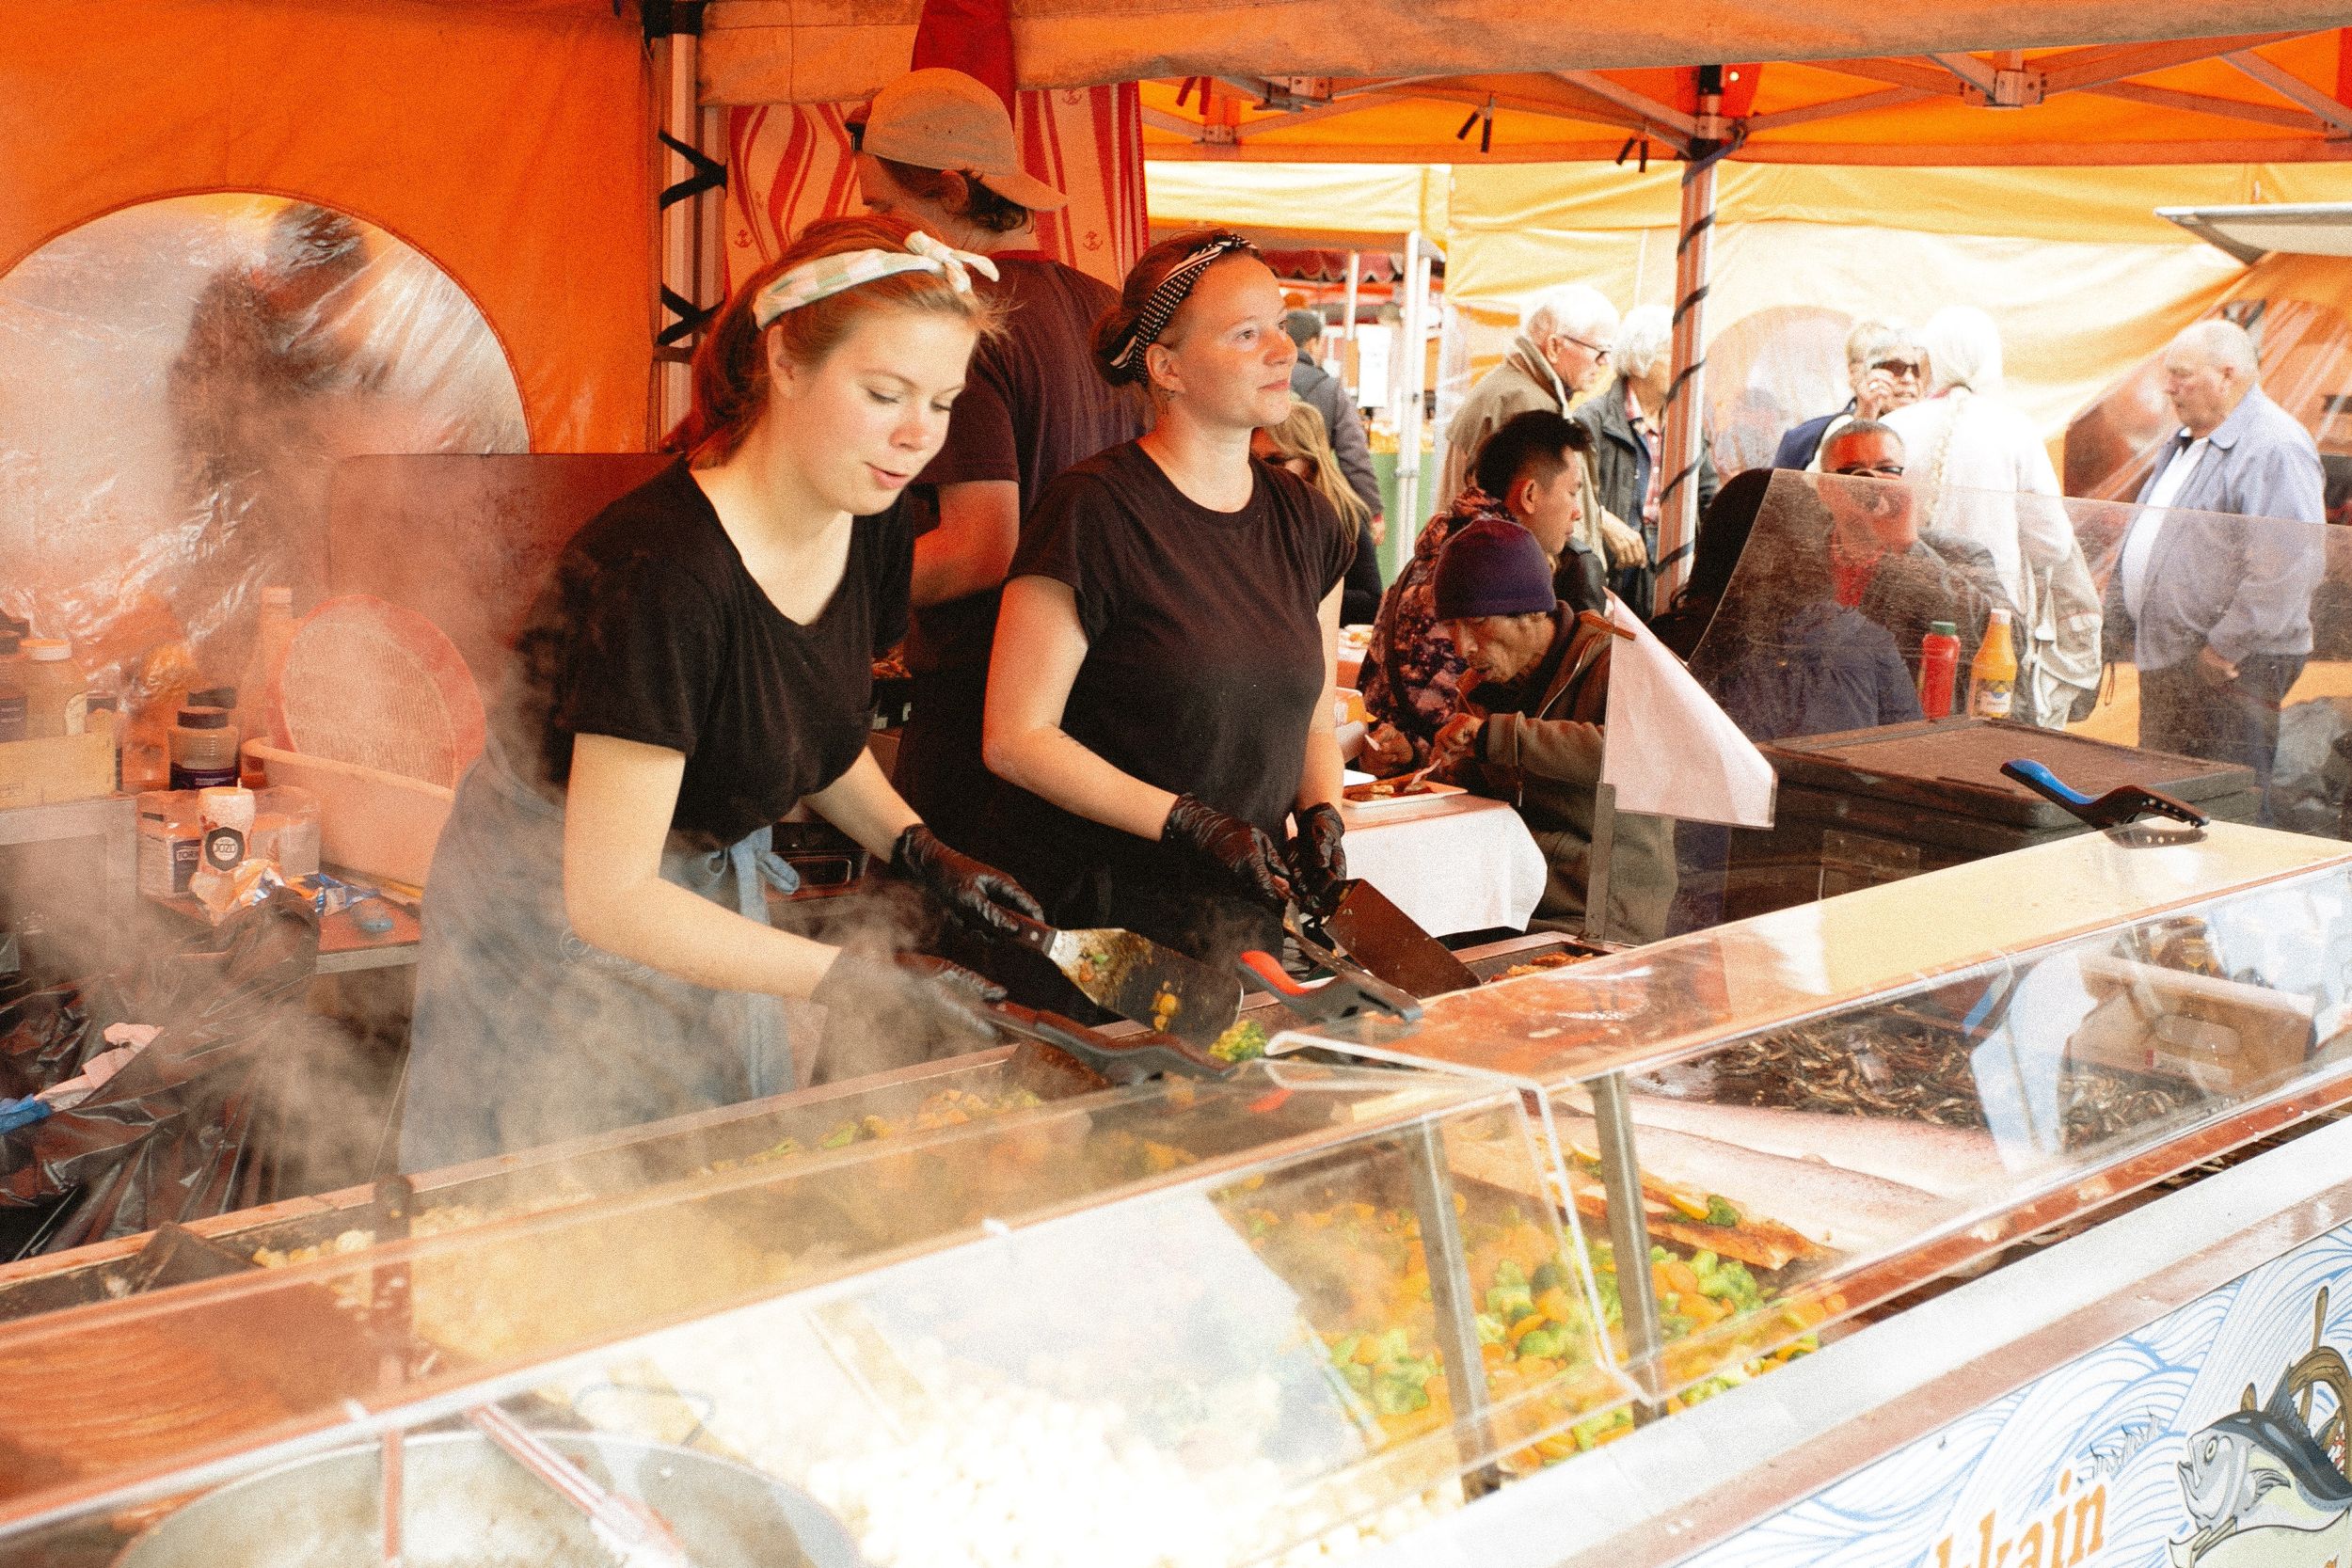 Women in black shirts sell seafood from festival stall.